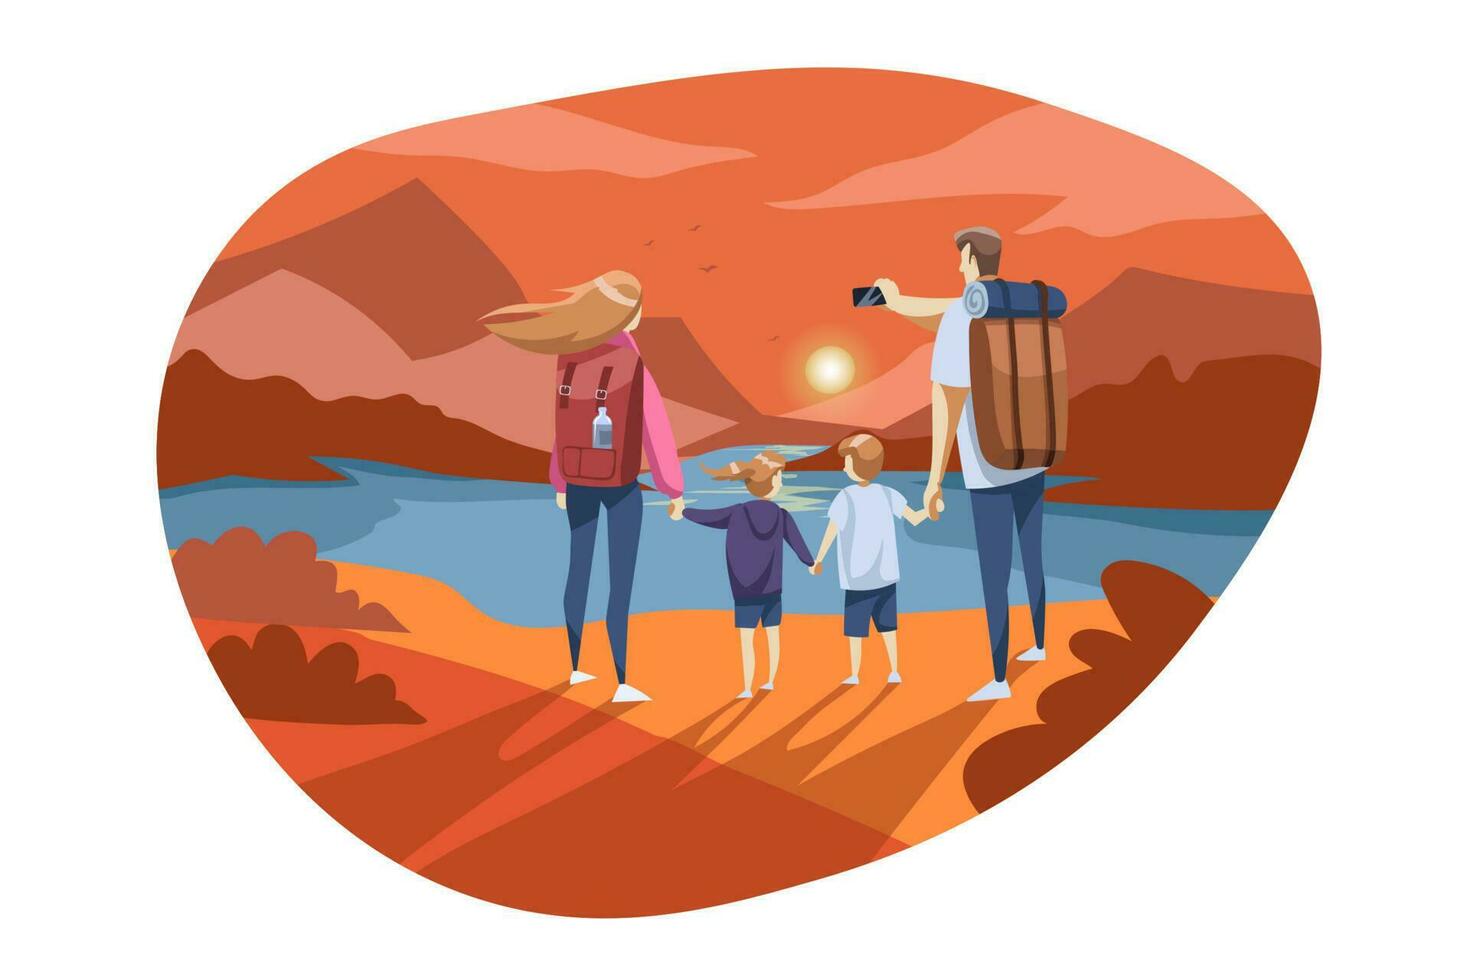 Travelling, family tourism, nature, hiking concept vector